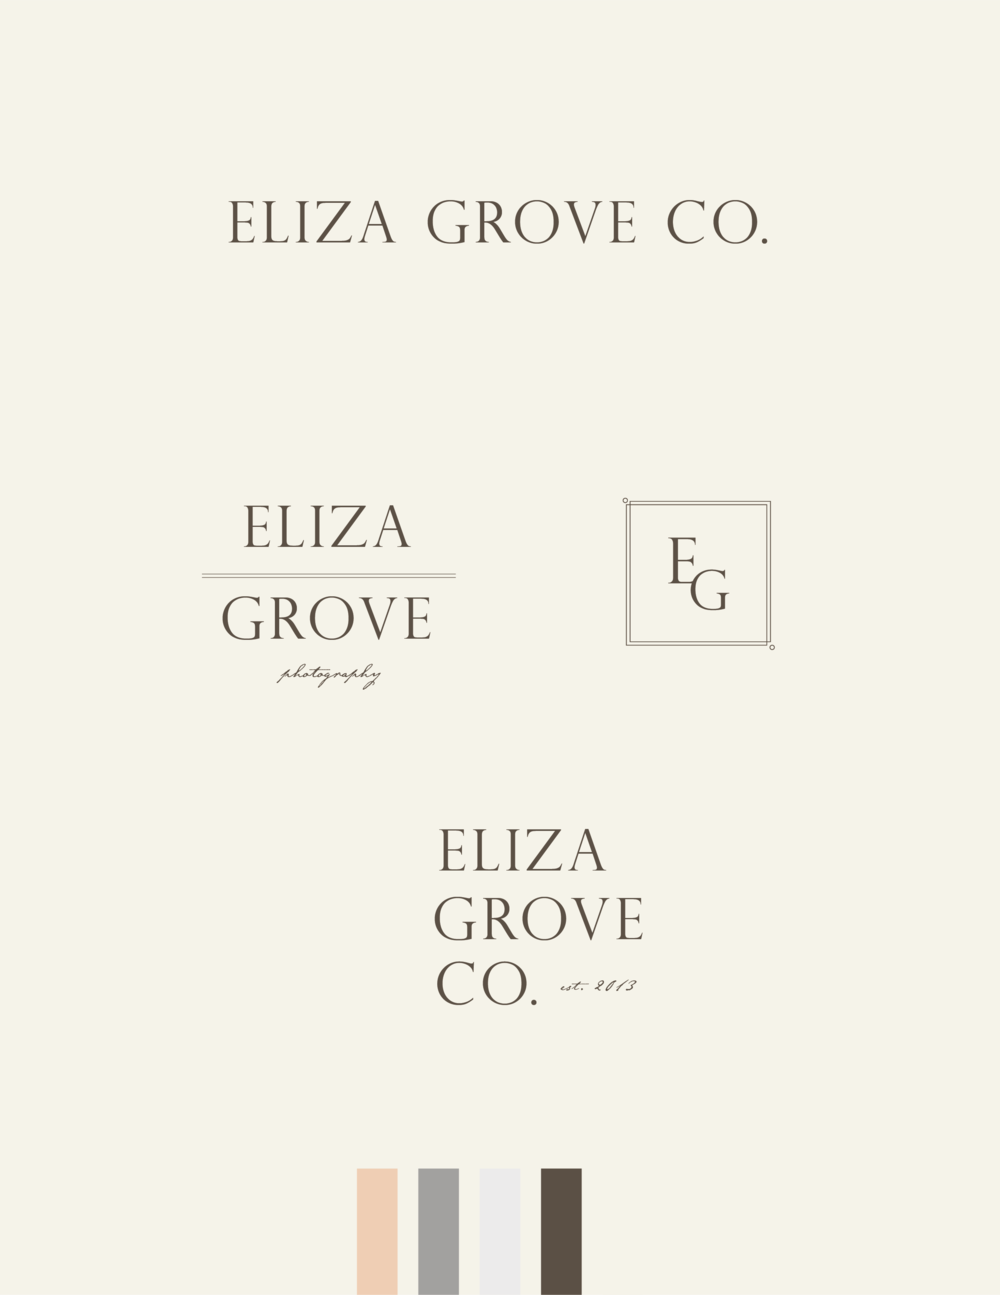 Eliza Grove Co brand kit by Jordan Cotton as an example of one of 5 Brand Kit Examples to Inspire Your Brand Identity.